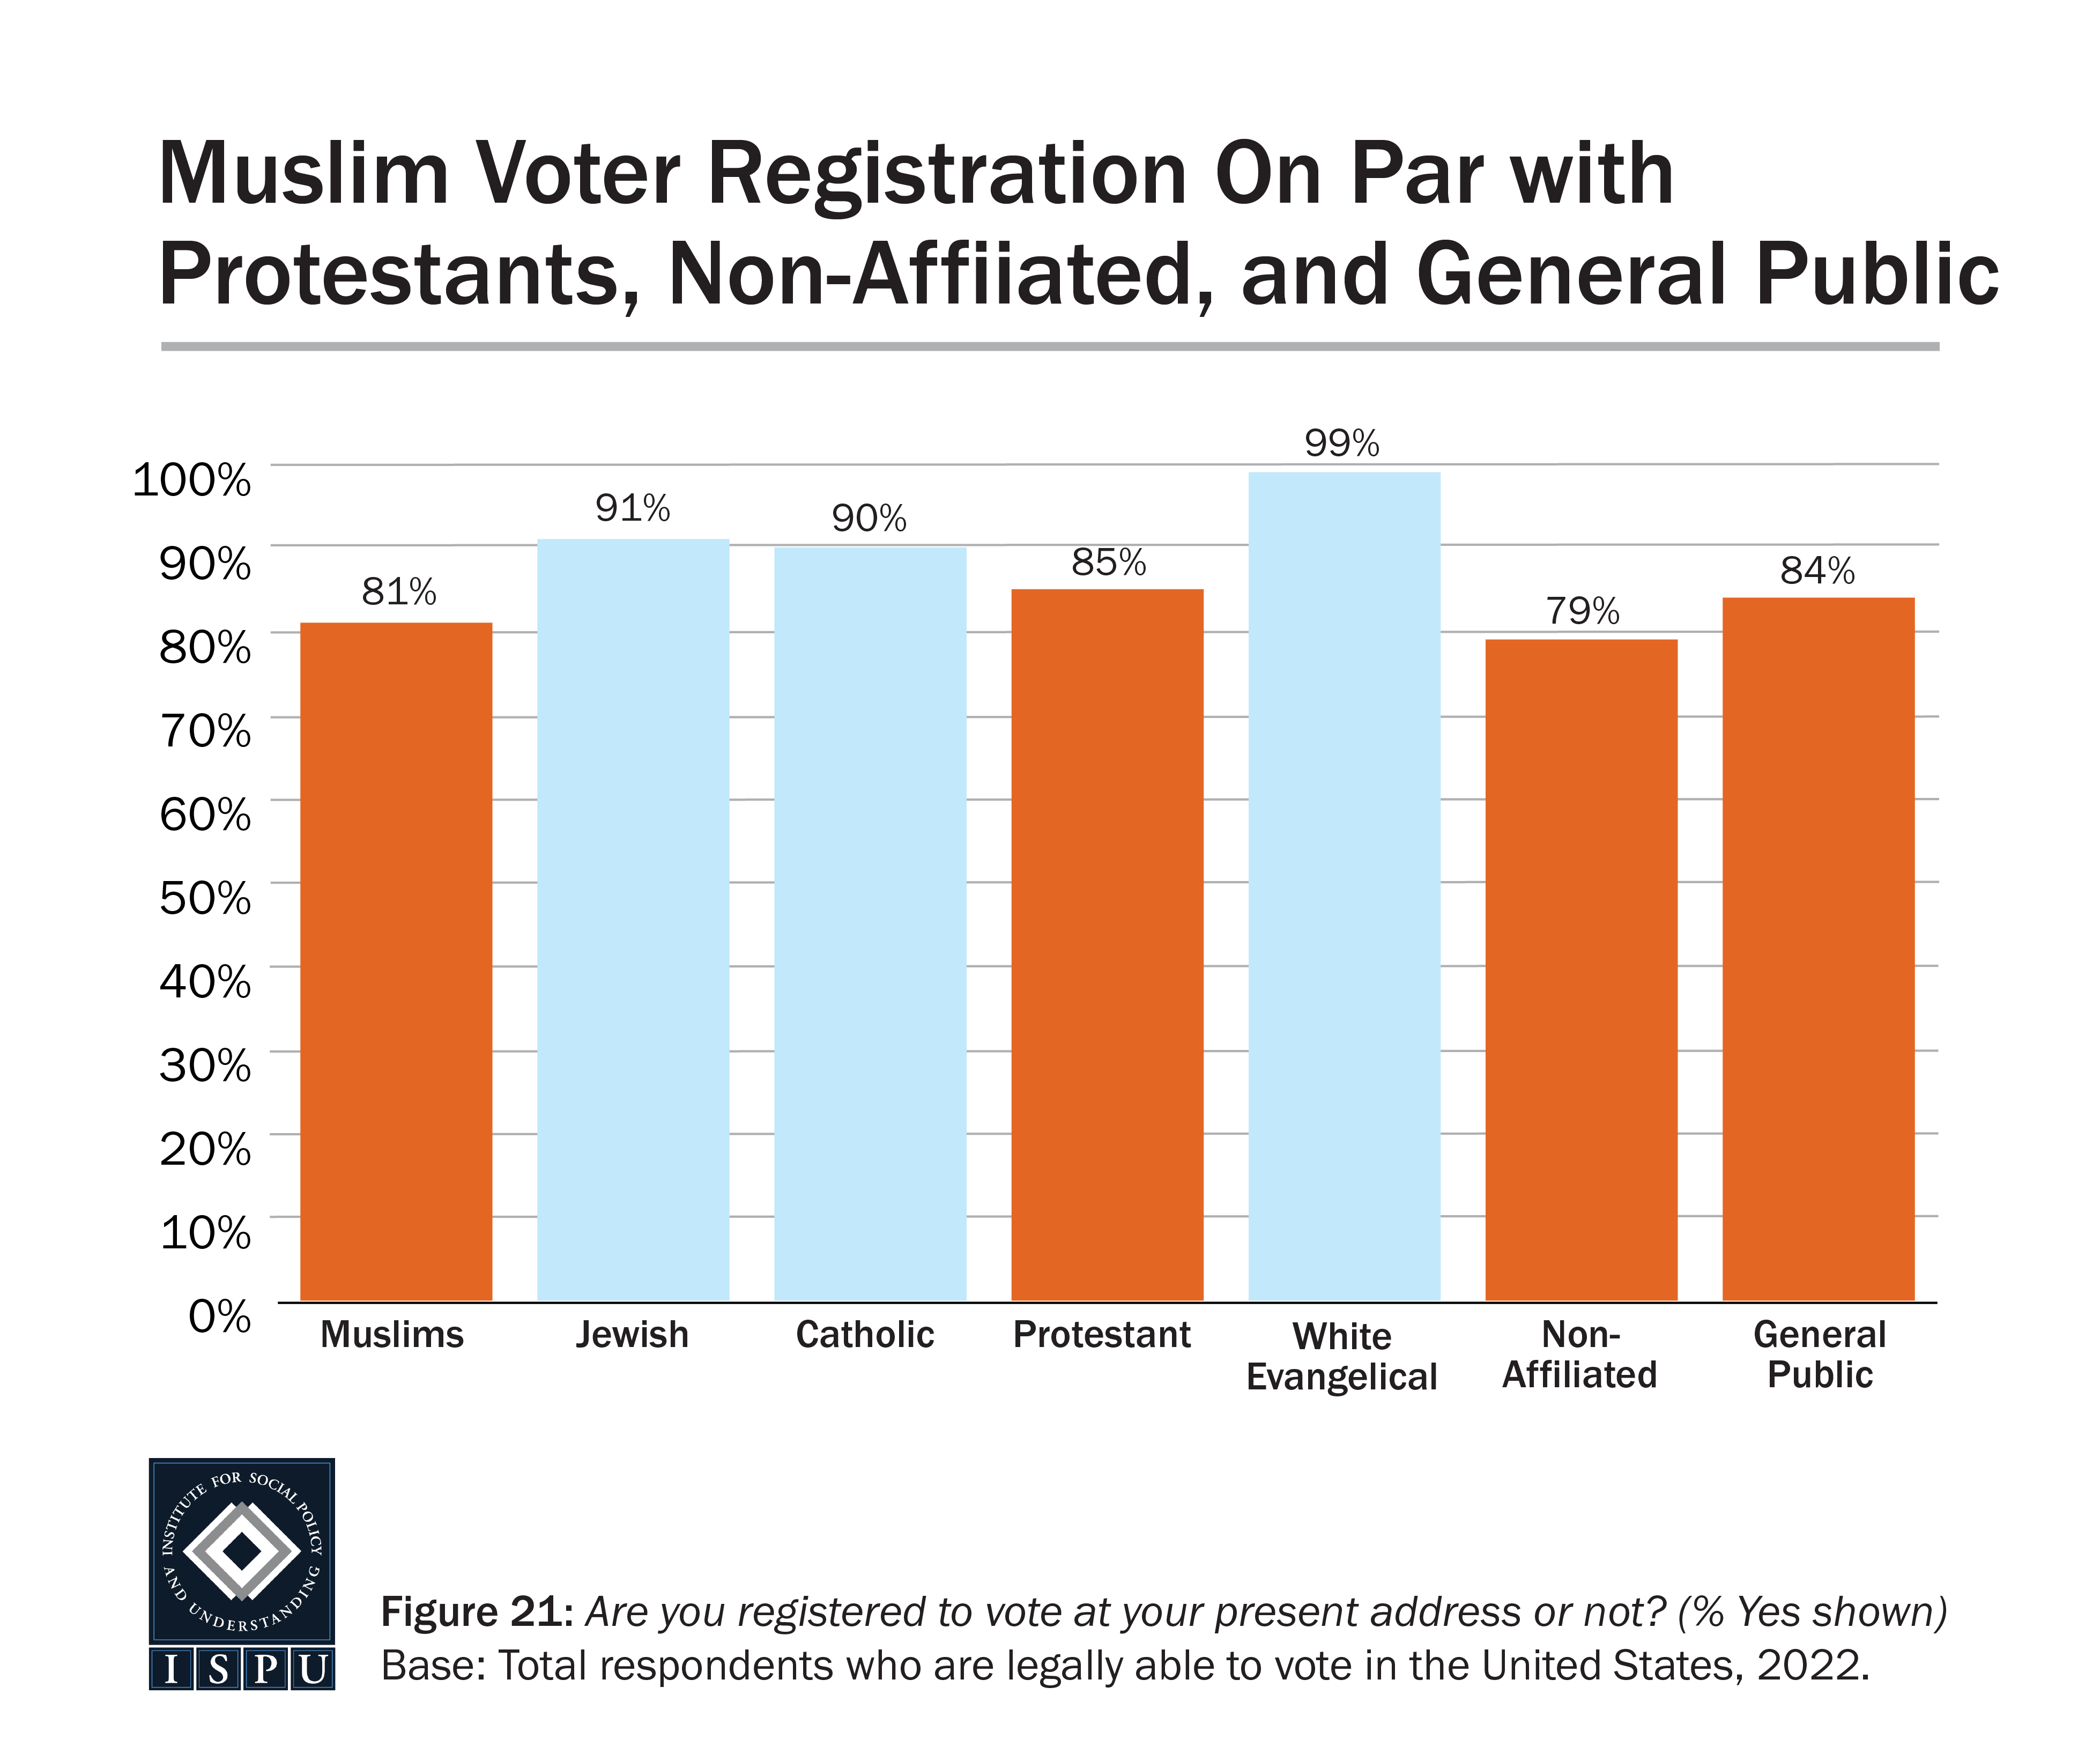 A bar graph showing the percentage of eligible voters in each group surveyed that is registered to vote.